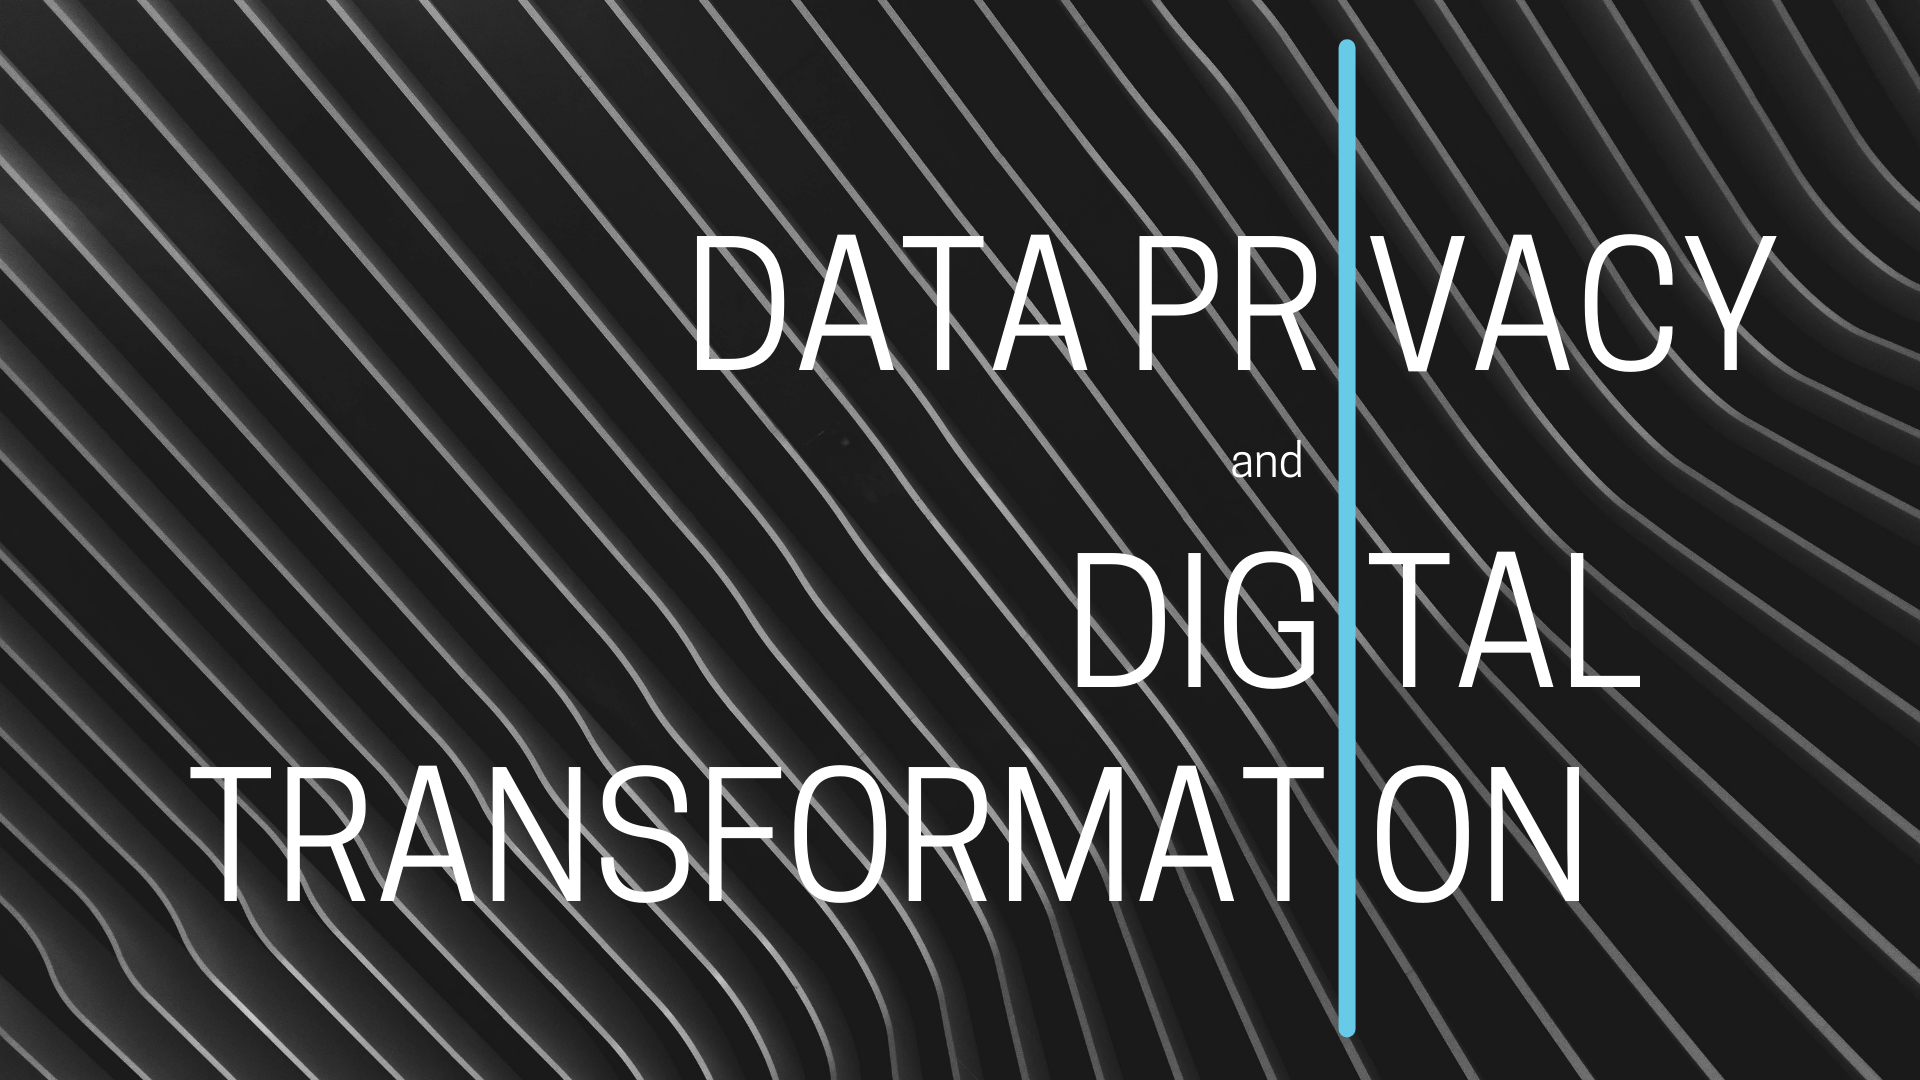 Data Privacy and Digital Transformation